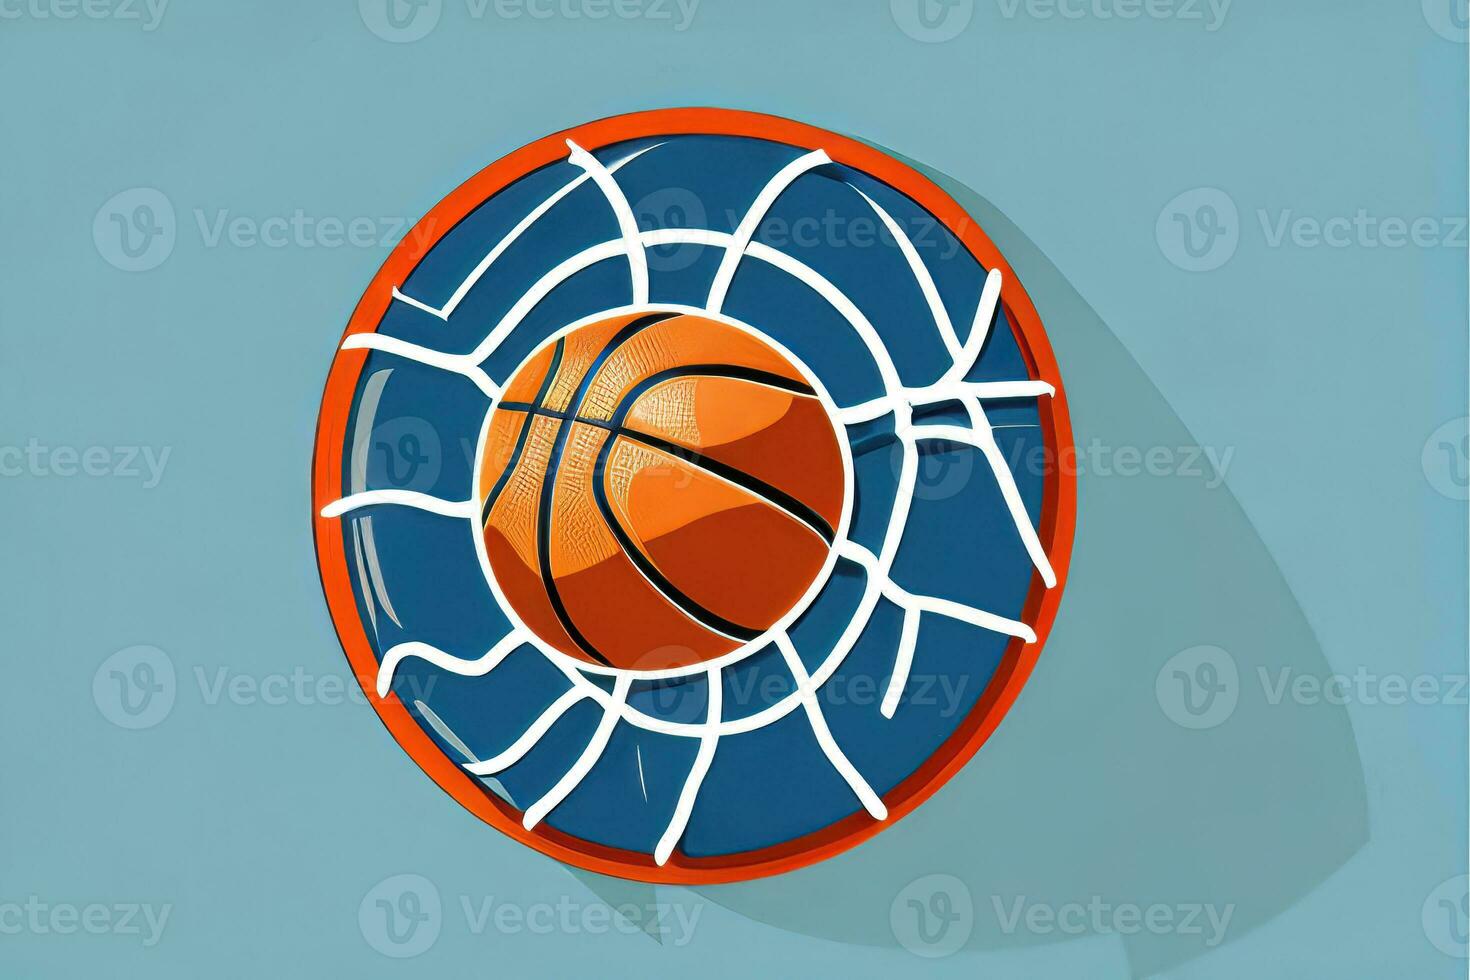 The Art of Athleticism - Abstract Basketball Illustration photo